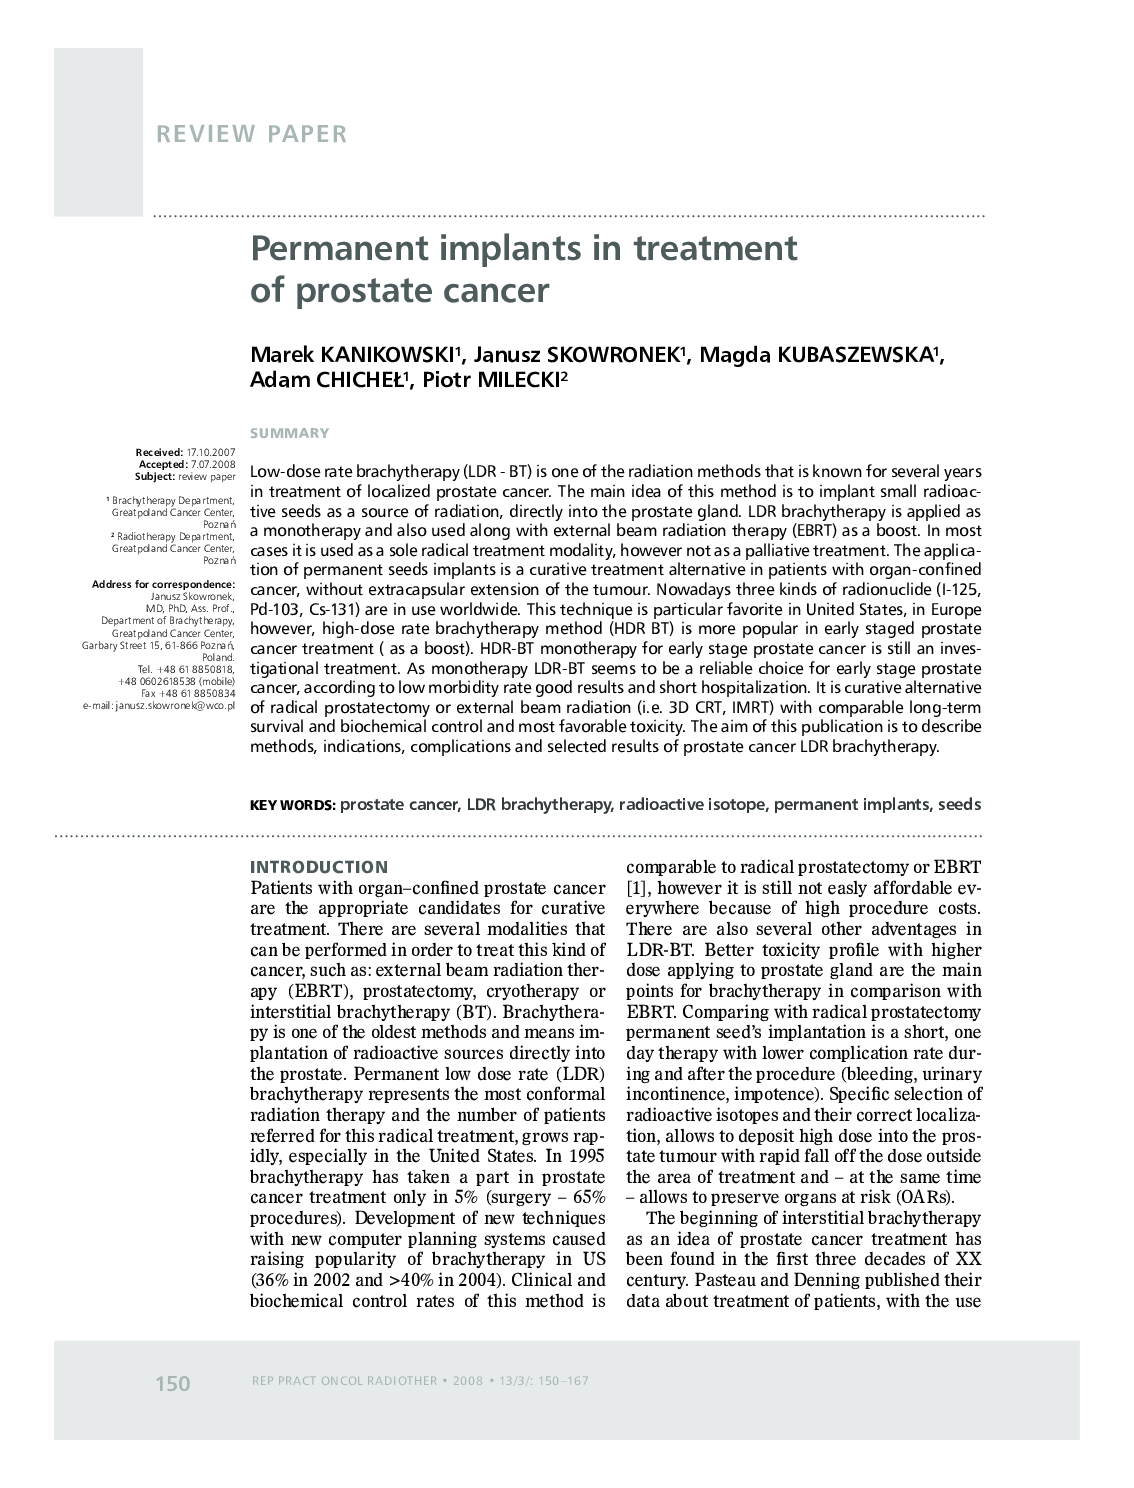 Permanent implants in treatment of prostate cancer